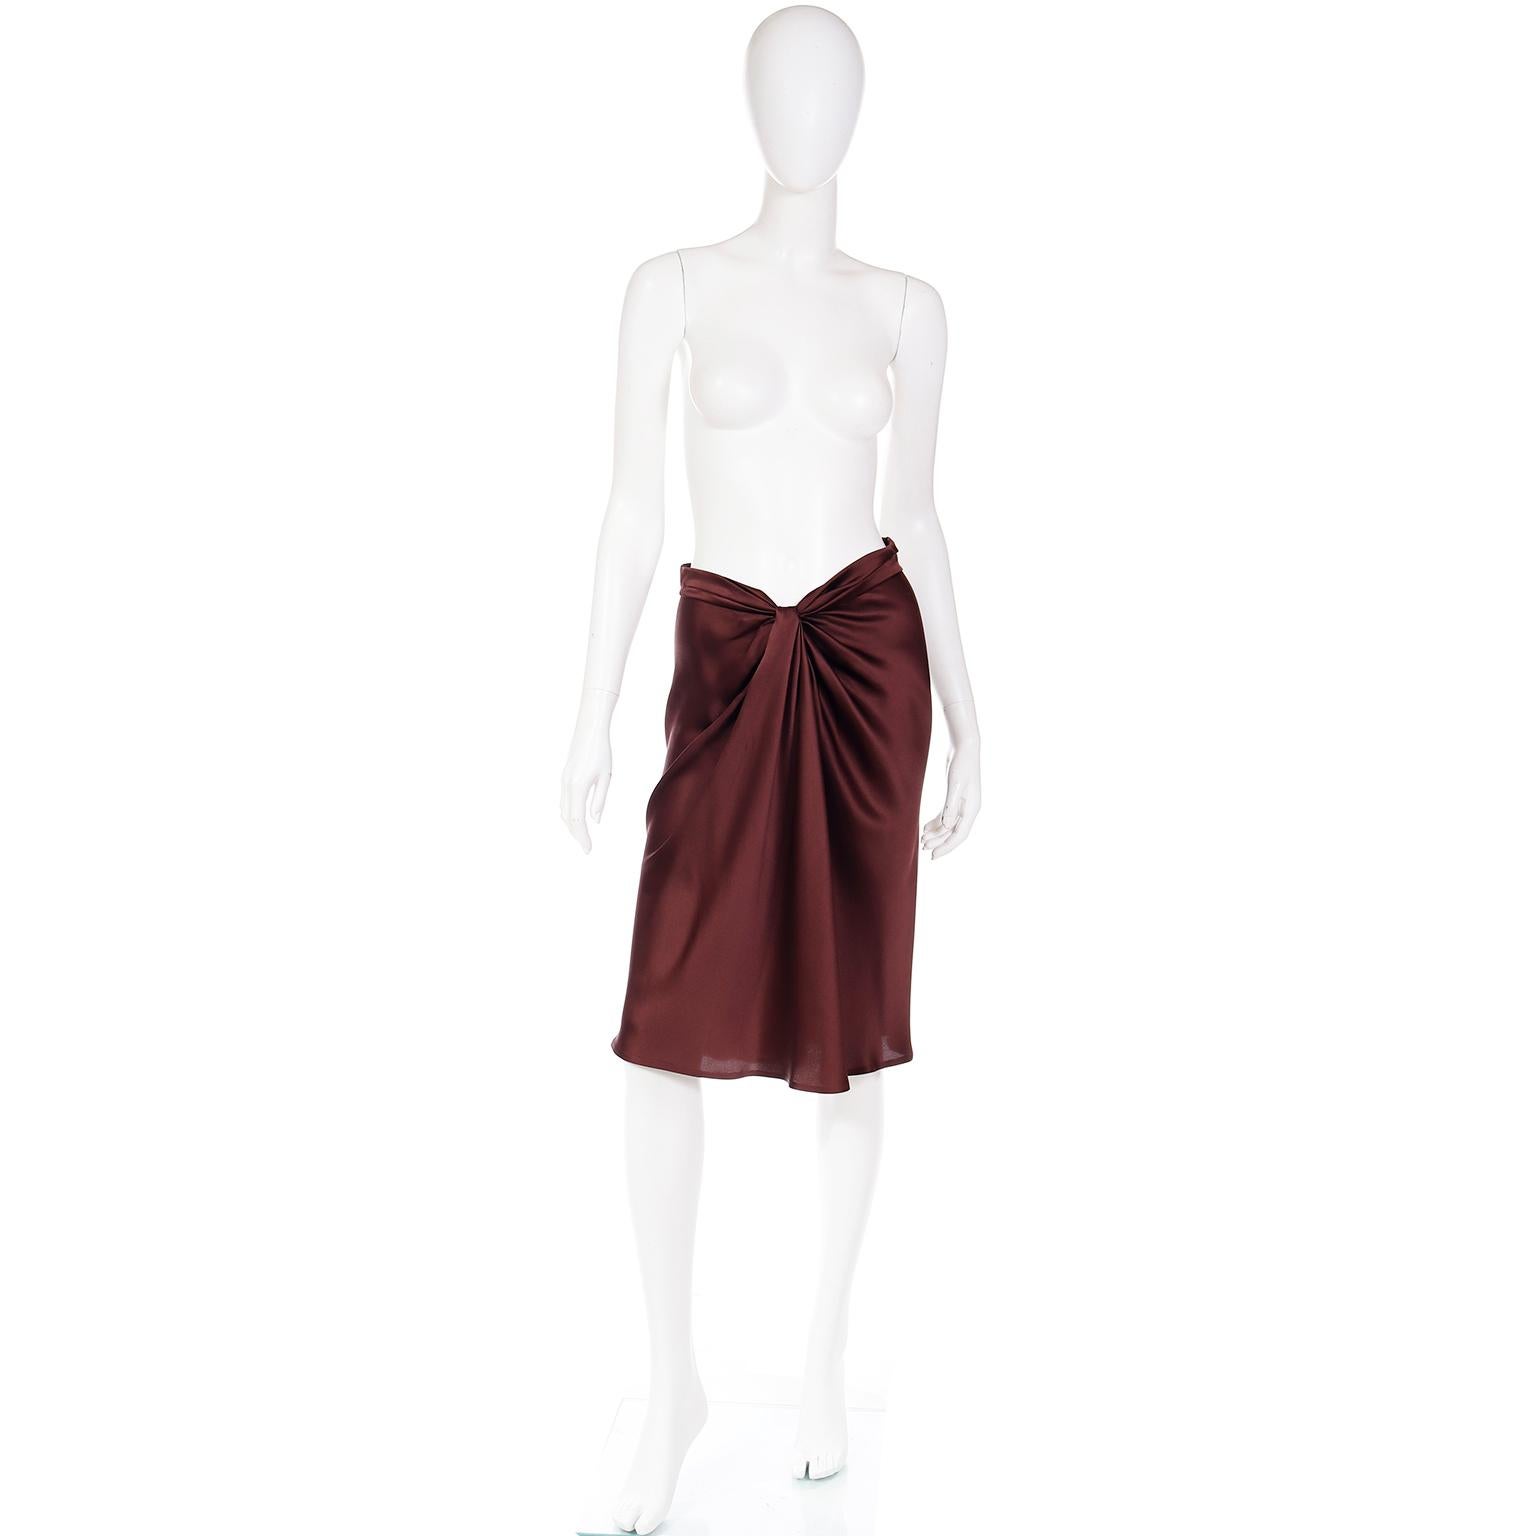 This early 2000's Alberta Ferretti chocolate brown skirt is in an ultra luxurious silk charmeuse. This skirt has a gathered v shape waist with lovely draping at the center, and a hidden center back zipper for closure. These skirts are so current